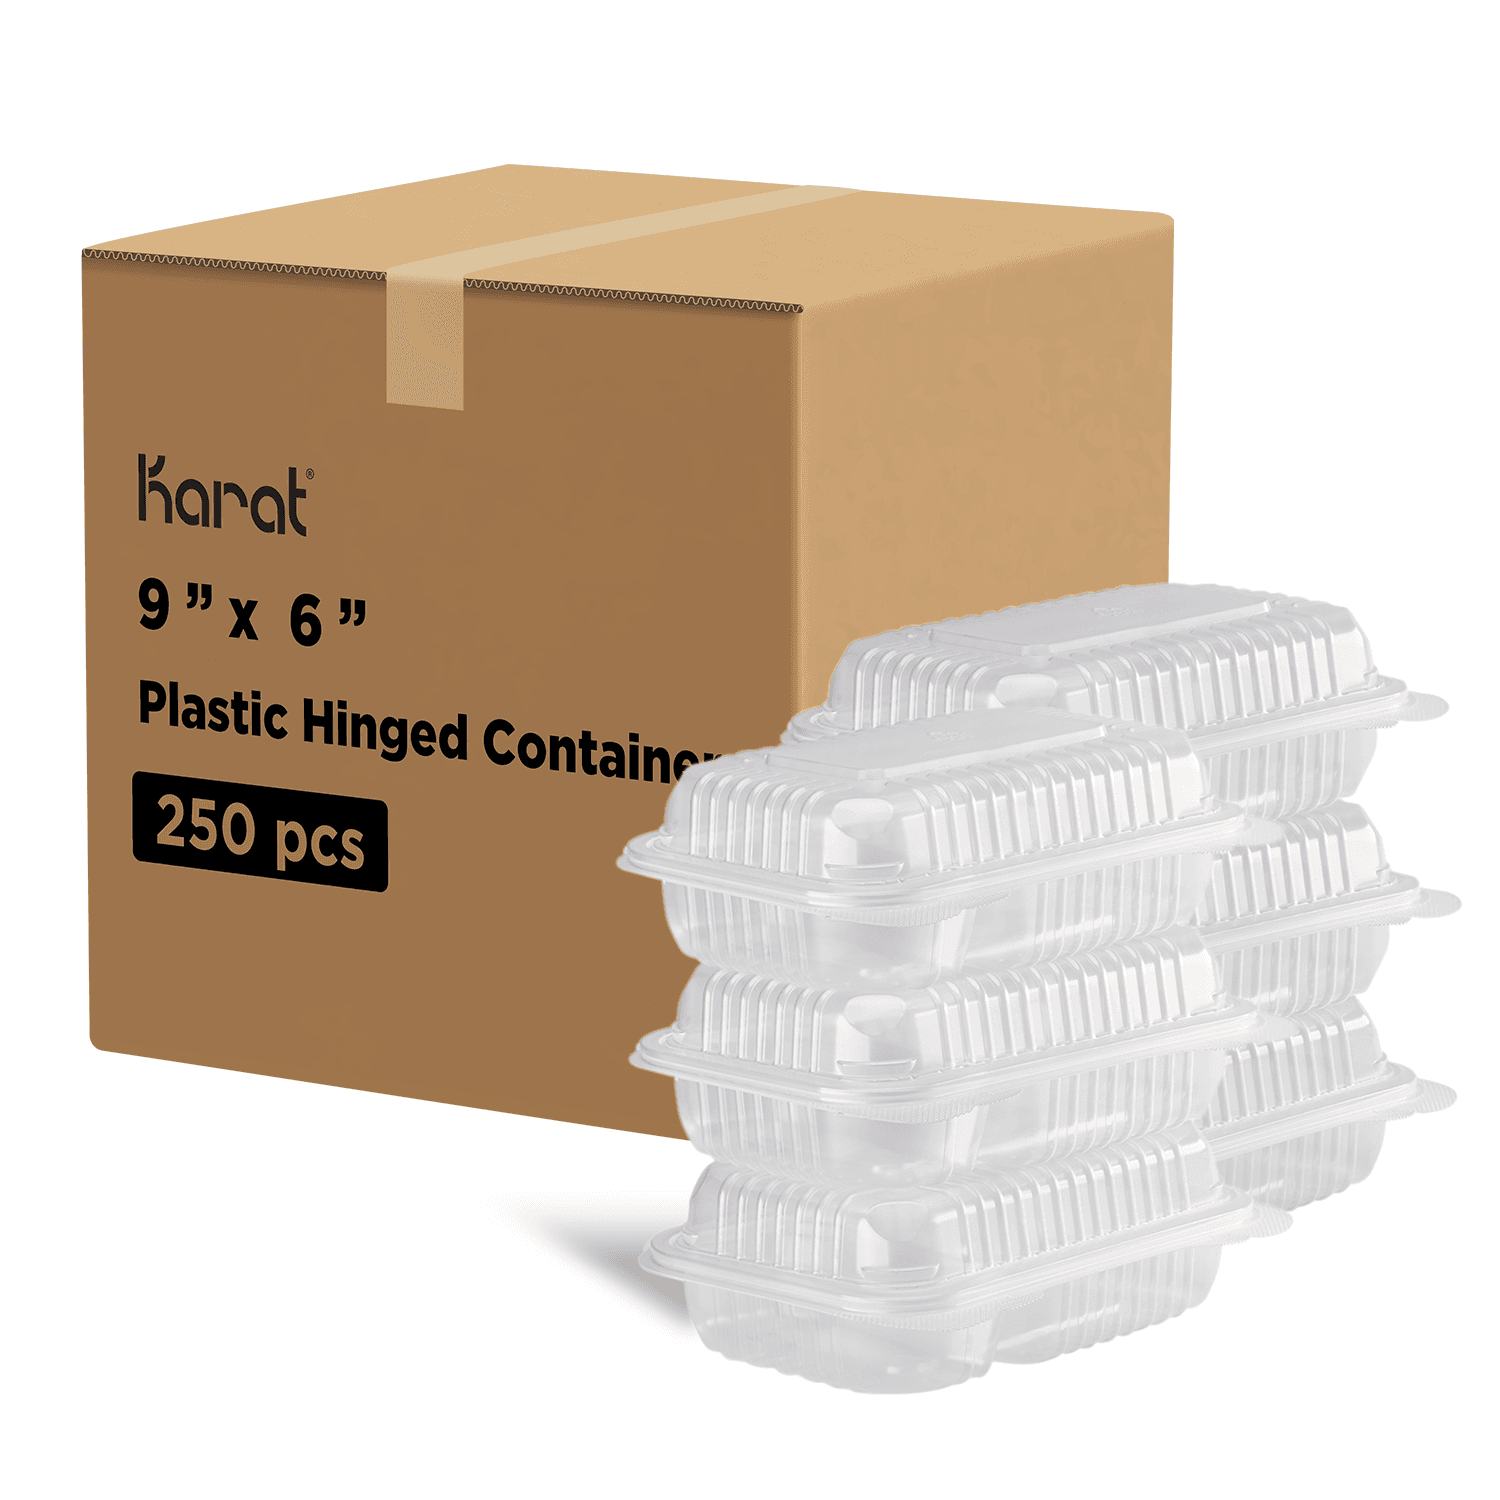 Karat 9'' x 6" PP Plastic Hinged Containers with 2 Compartments next to packaging